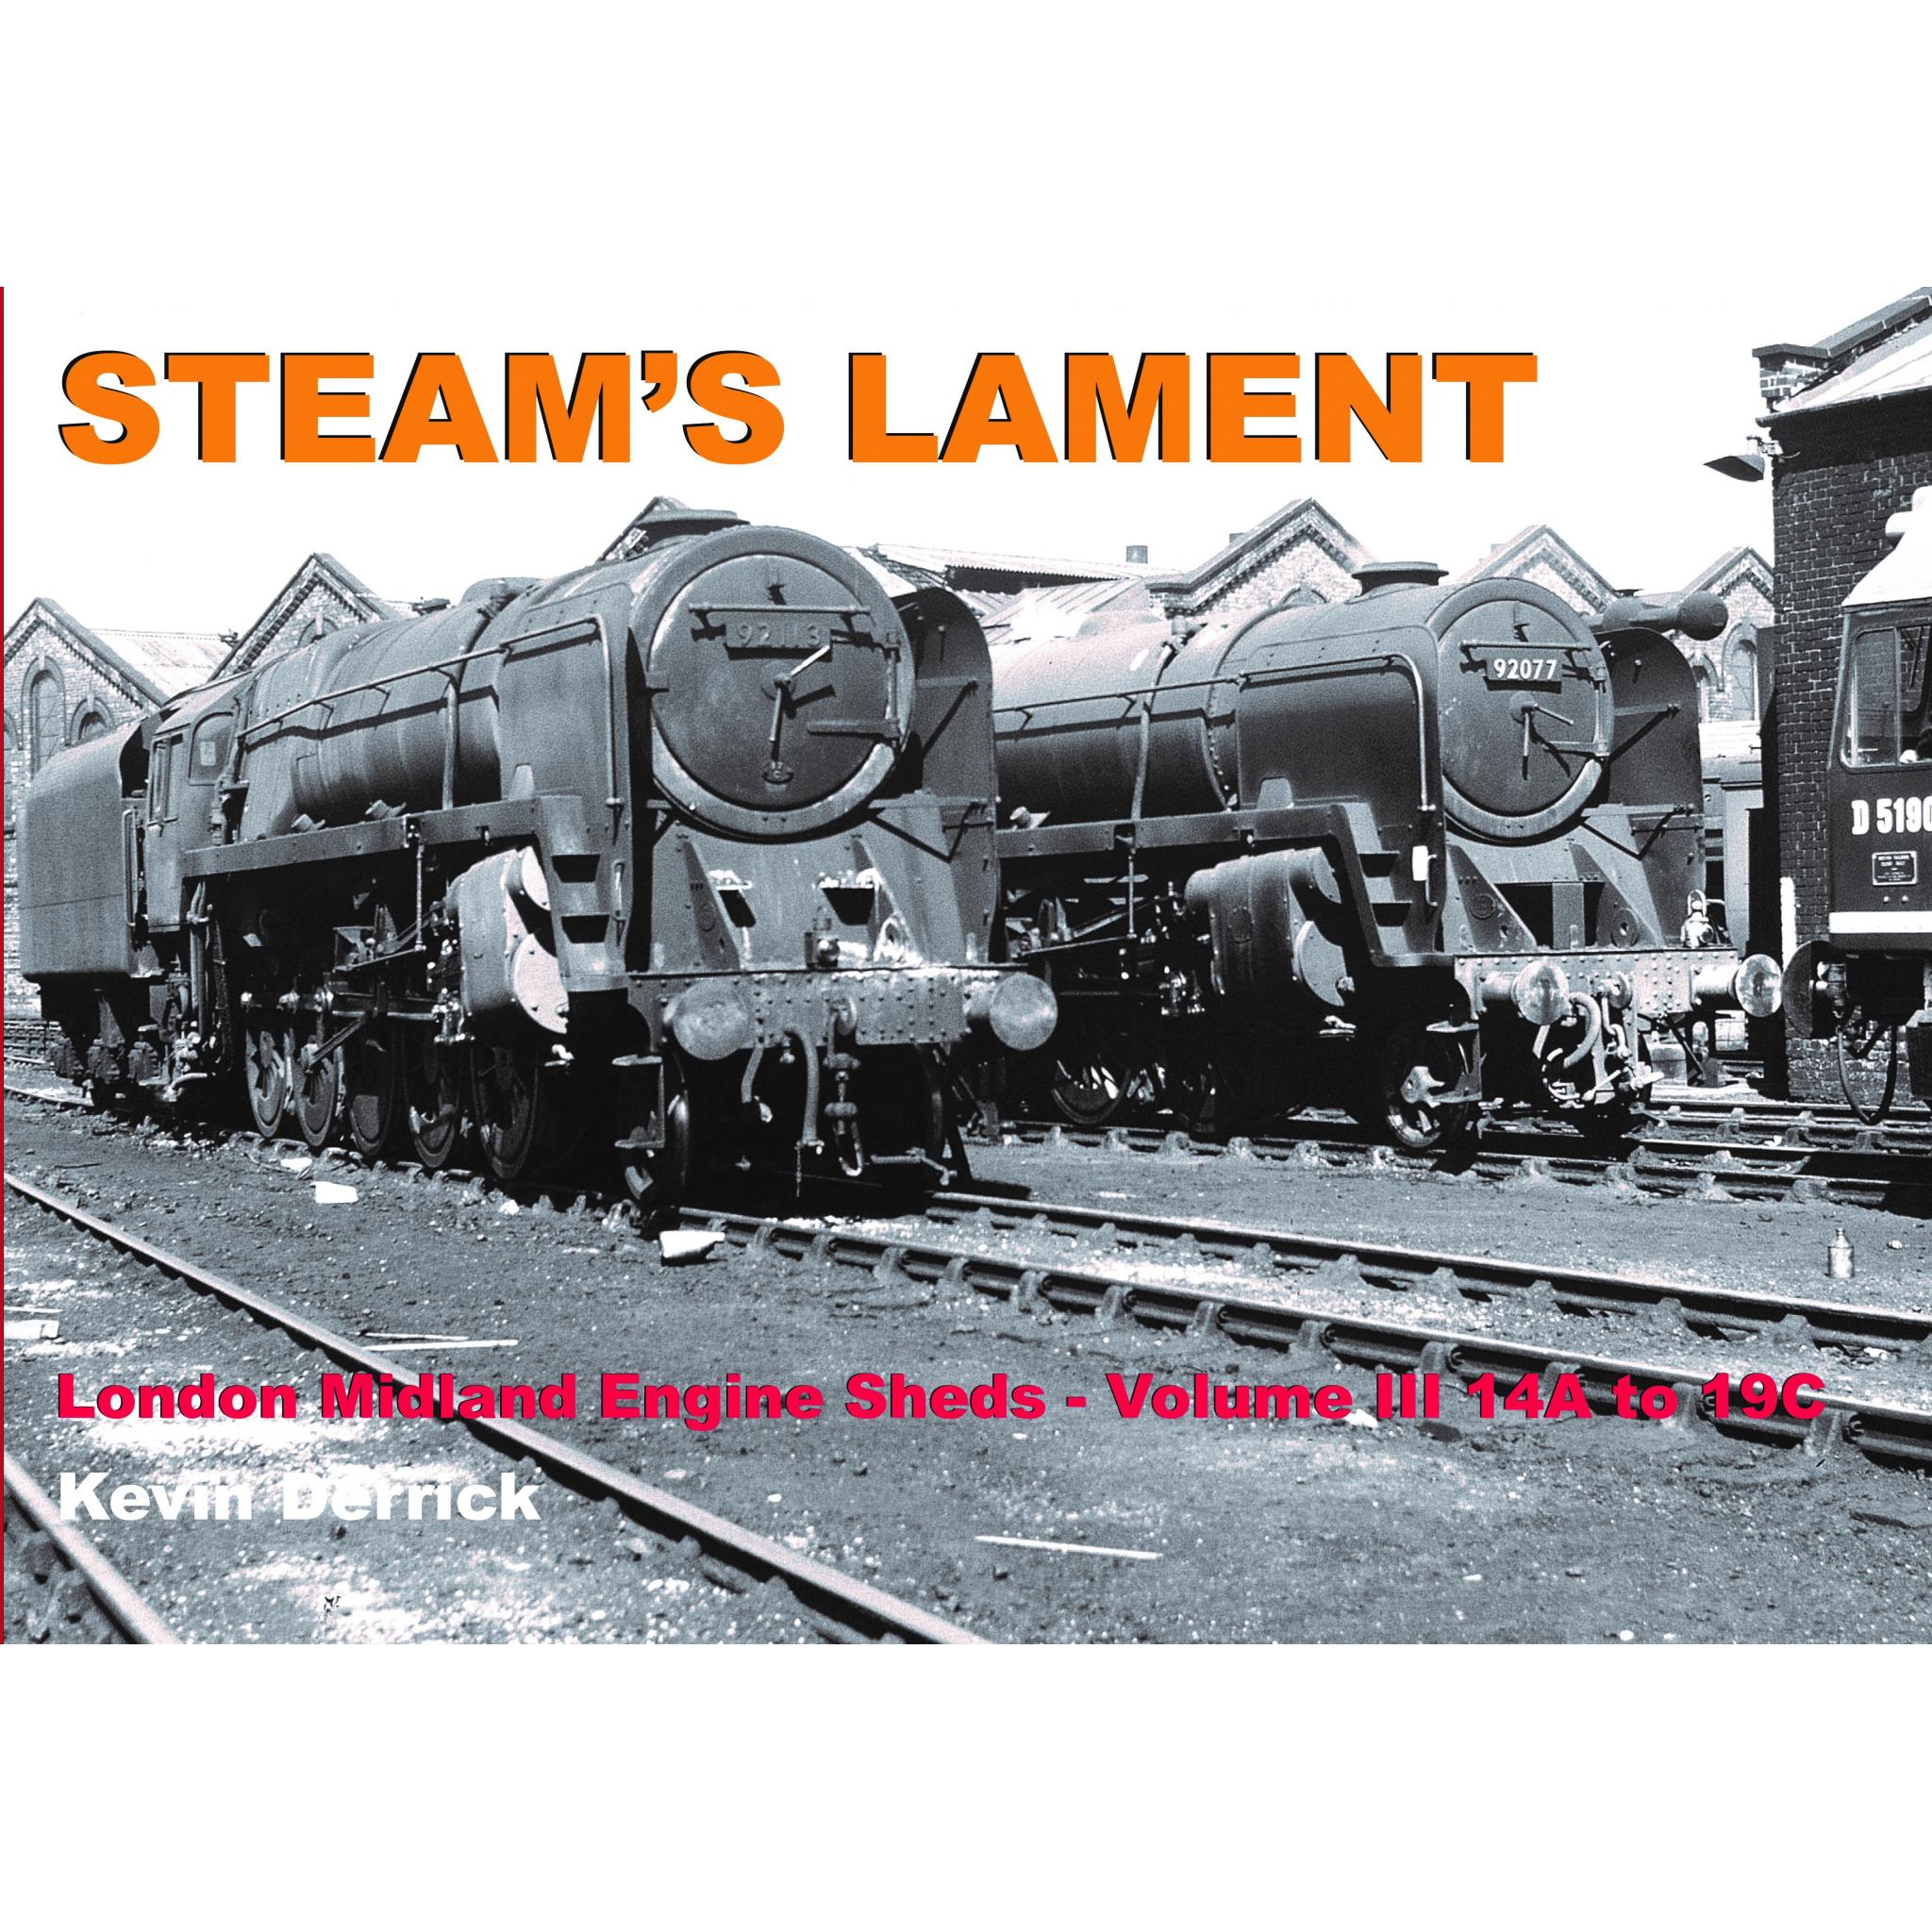 STEAM'S LAMENT London Midland Region Engine Sheds III 14A to 19C  ALMOST SOLD OUT